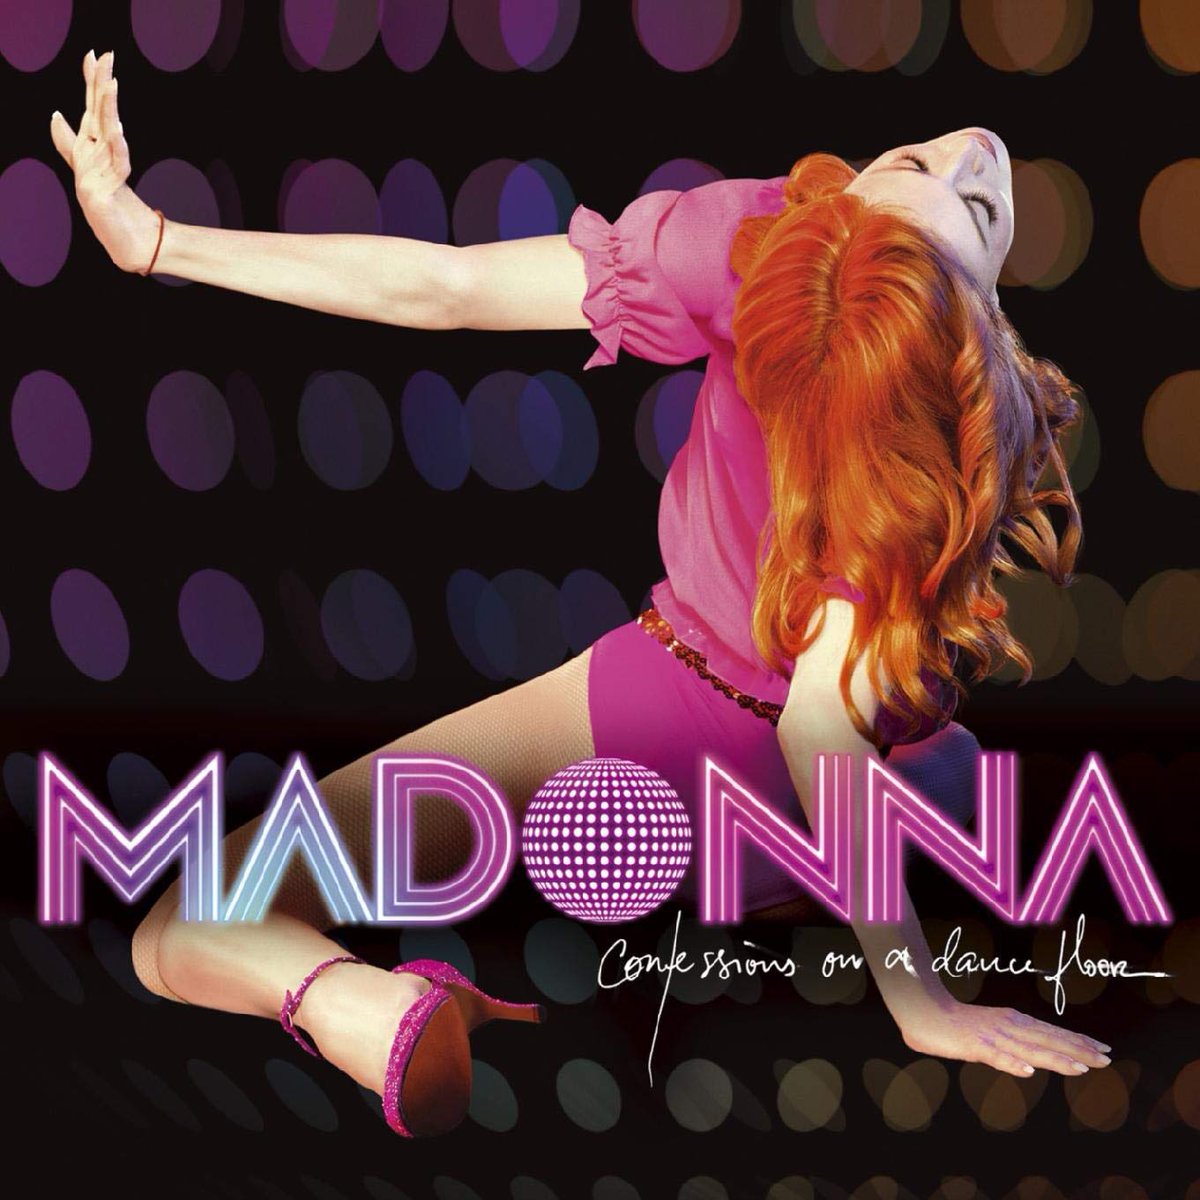 If Confessions On A Dance Floor by Madonna was a visual album: a THREAD.